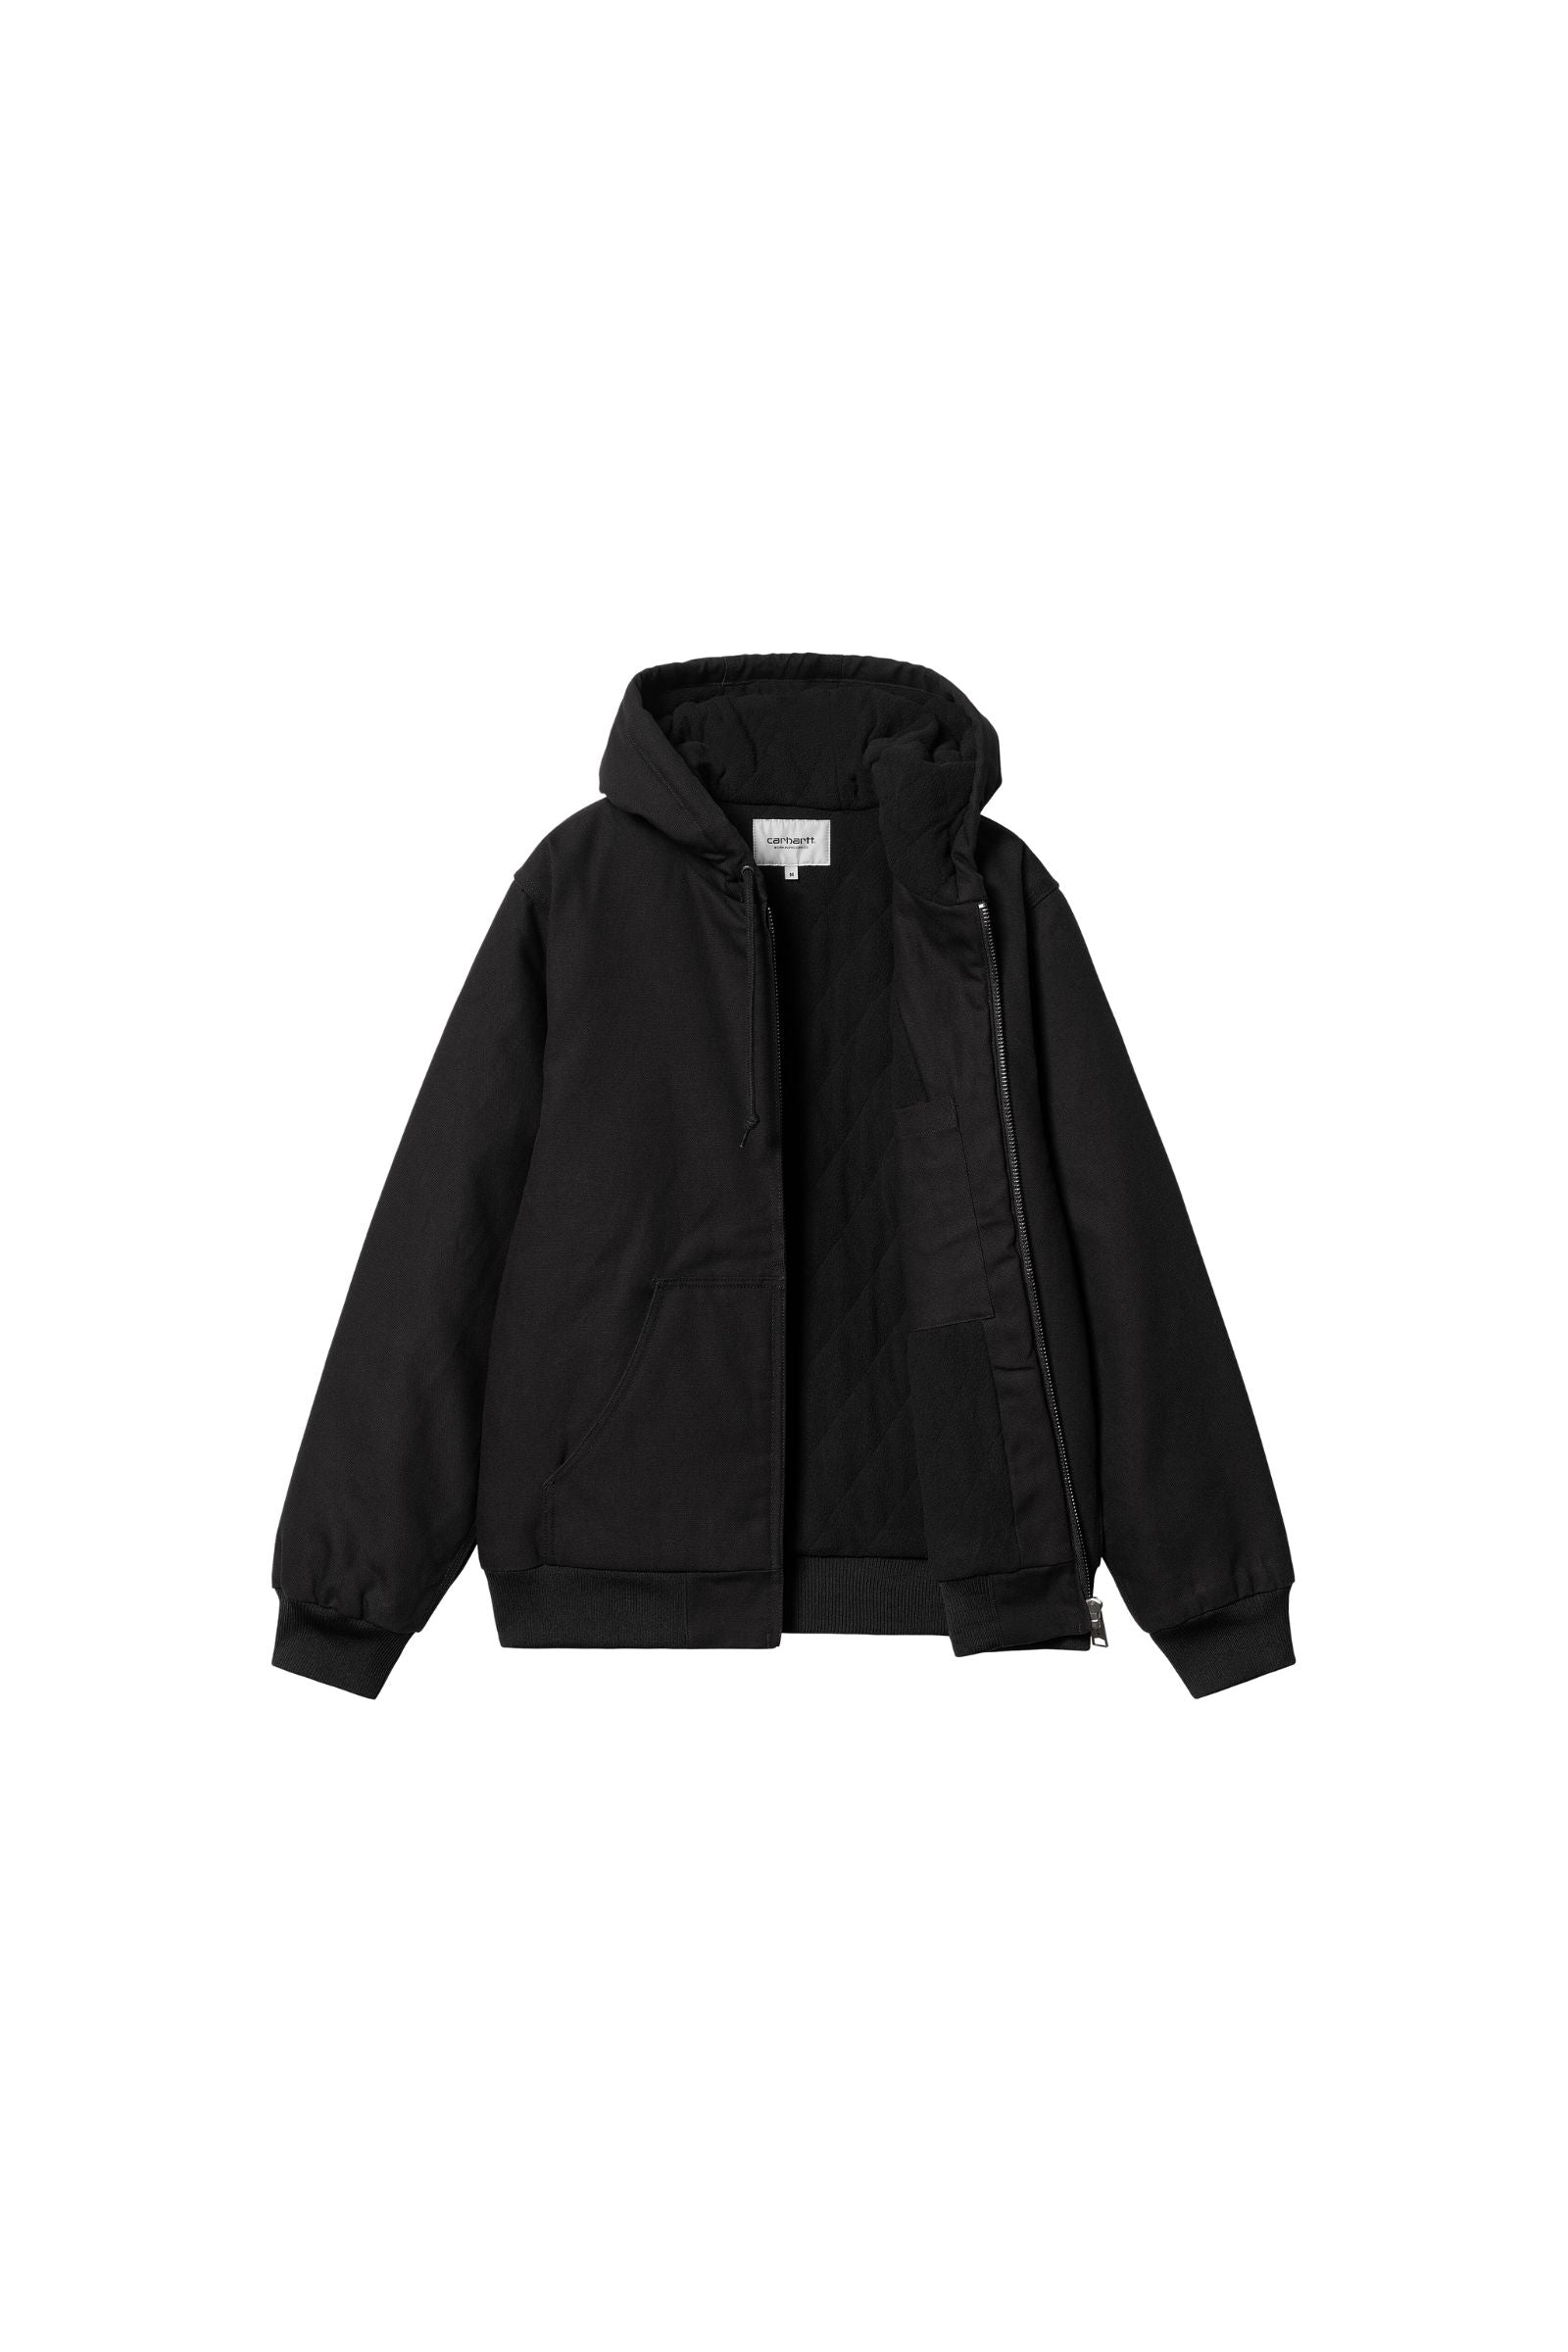 Men's Active Jacket-Black-Front View With Jacket Opened